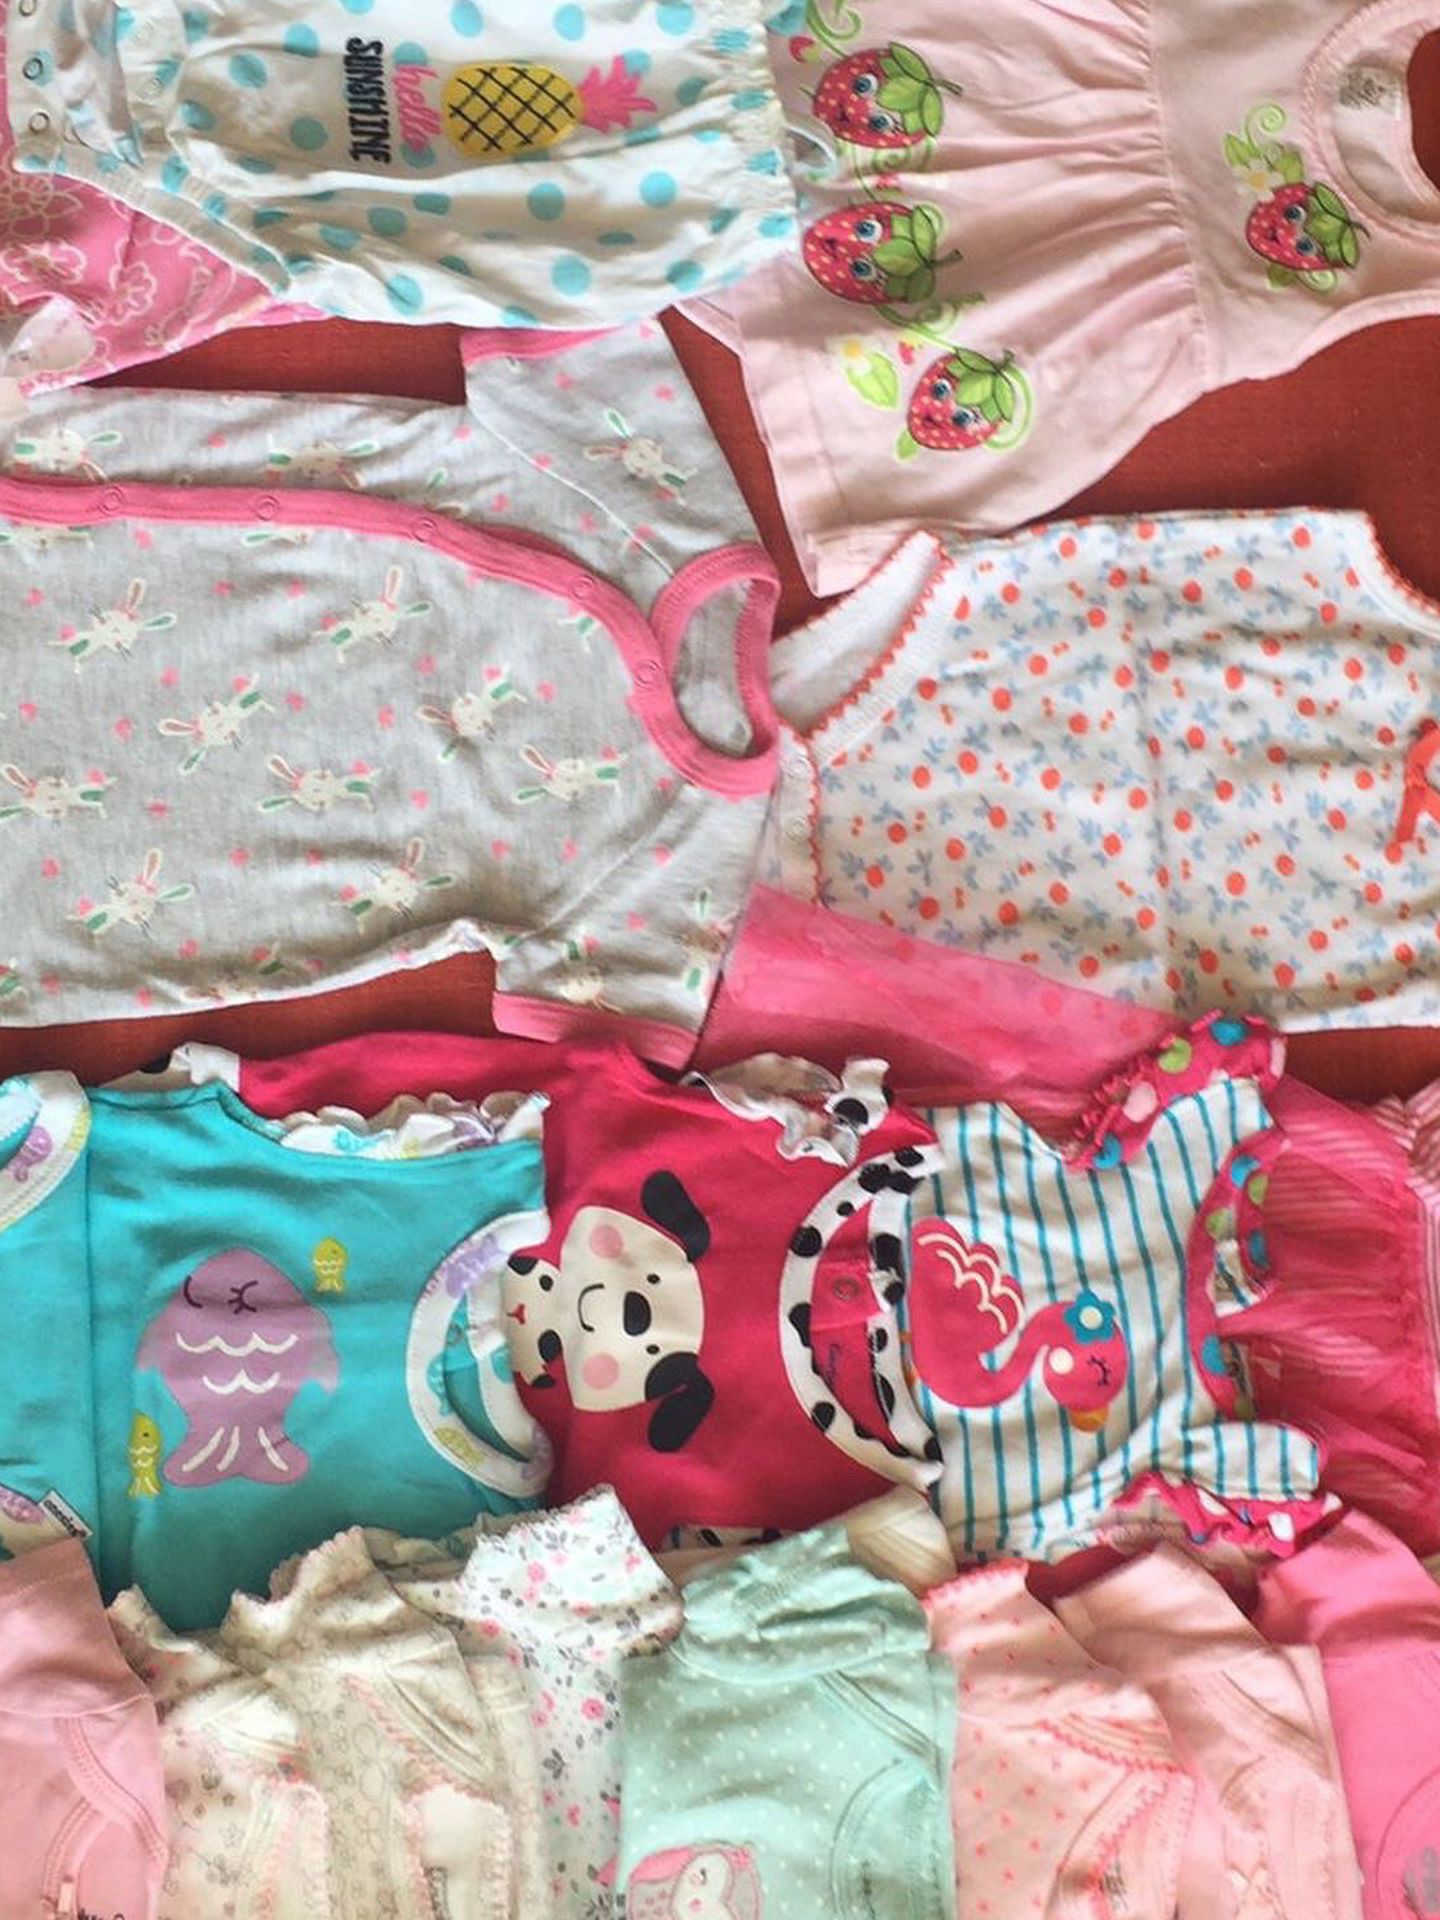 Nee born girl clothes And Pj’s, Toys